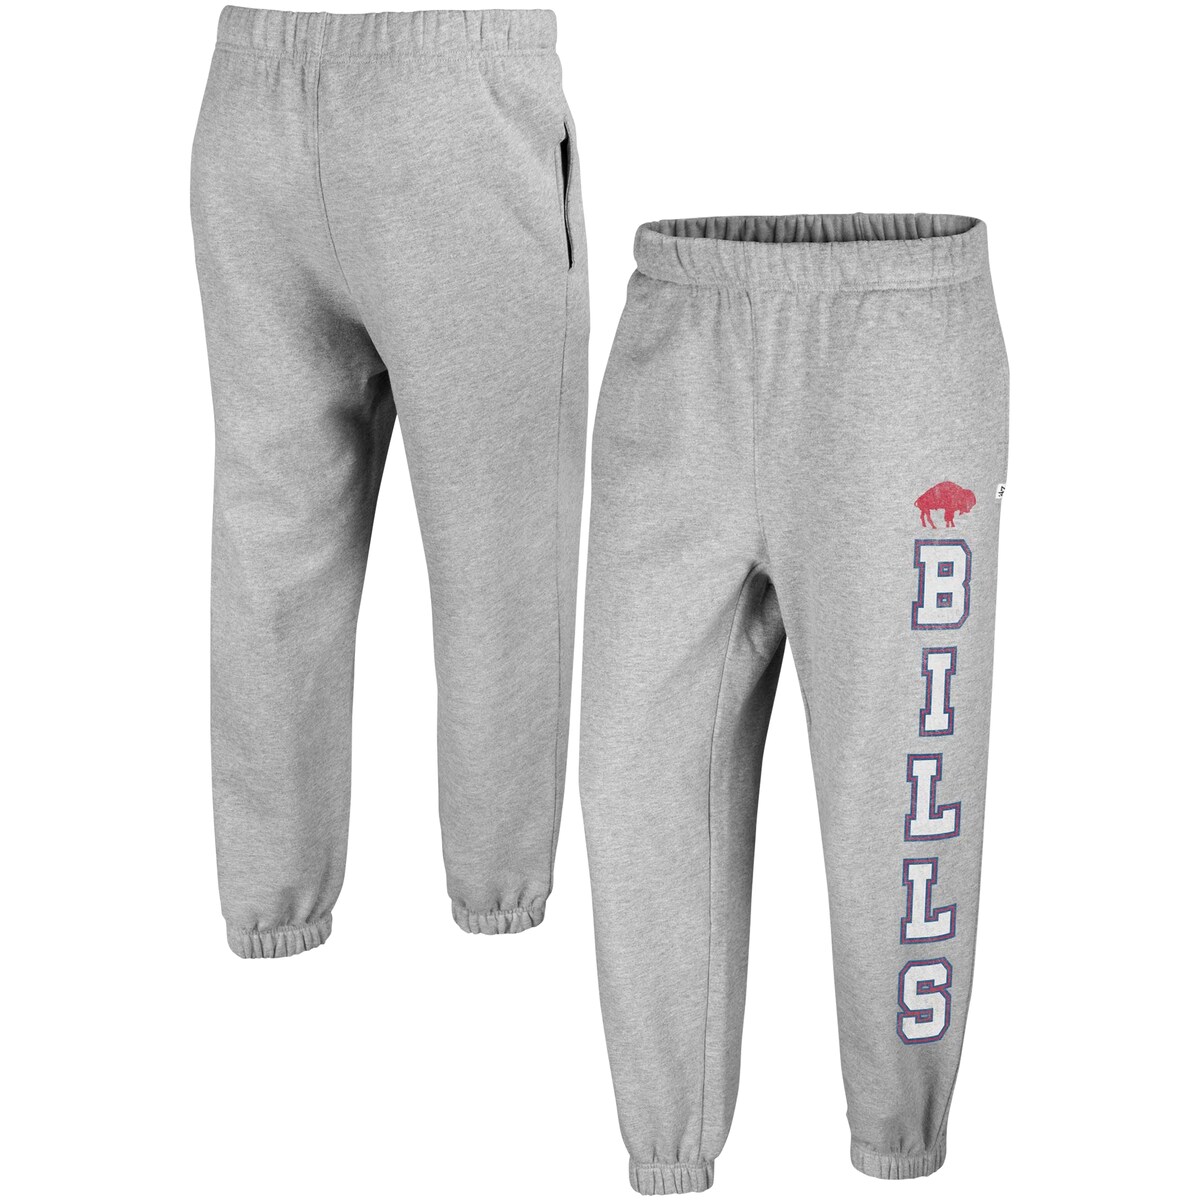 When snuggling up for Buffalo Bills game day, be sure to make these Double Pro Harper joggers from '47 part of your outfit. Not only do they provide warmth, but they have an elastic waistband to give you your desired fit during every wear. The distressed team graphics on the leg are perfect for making your Buffalo Bills fandom undeniable.Brand: '47Officially licensedTwo side pocketsImportedMaterial: 60% Cotton/40% PolyesterElastic waistbandInseam on size S measures approx. 27"Elastic cuffs at anklesMachine wash, tumble dry lowDistressed screen print graphics